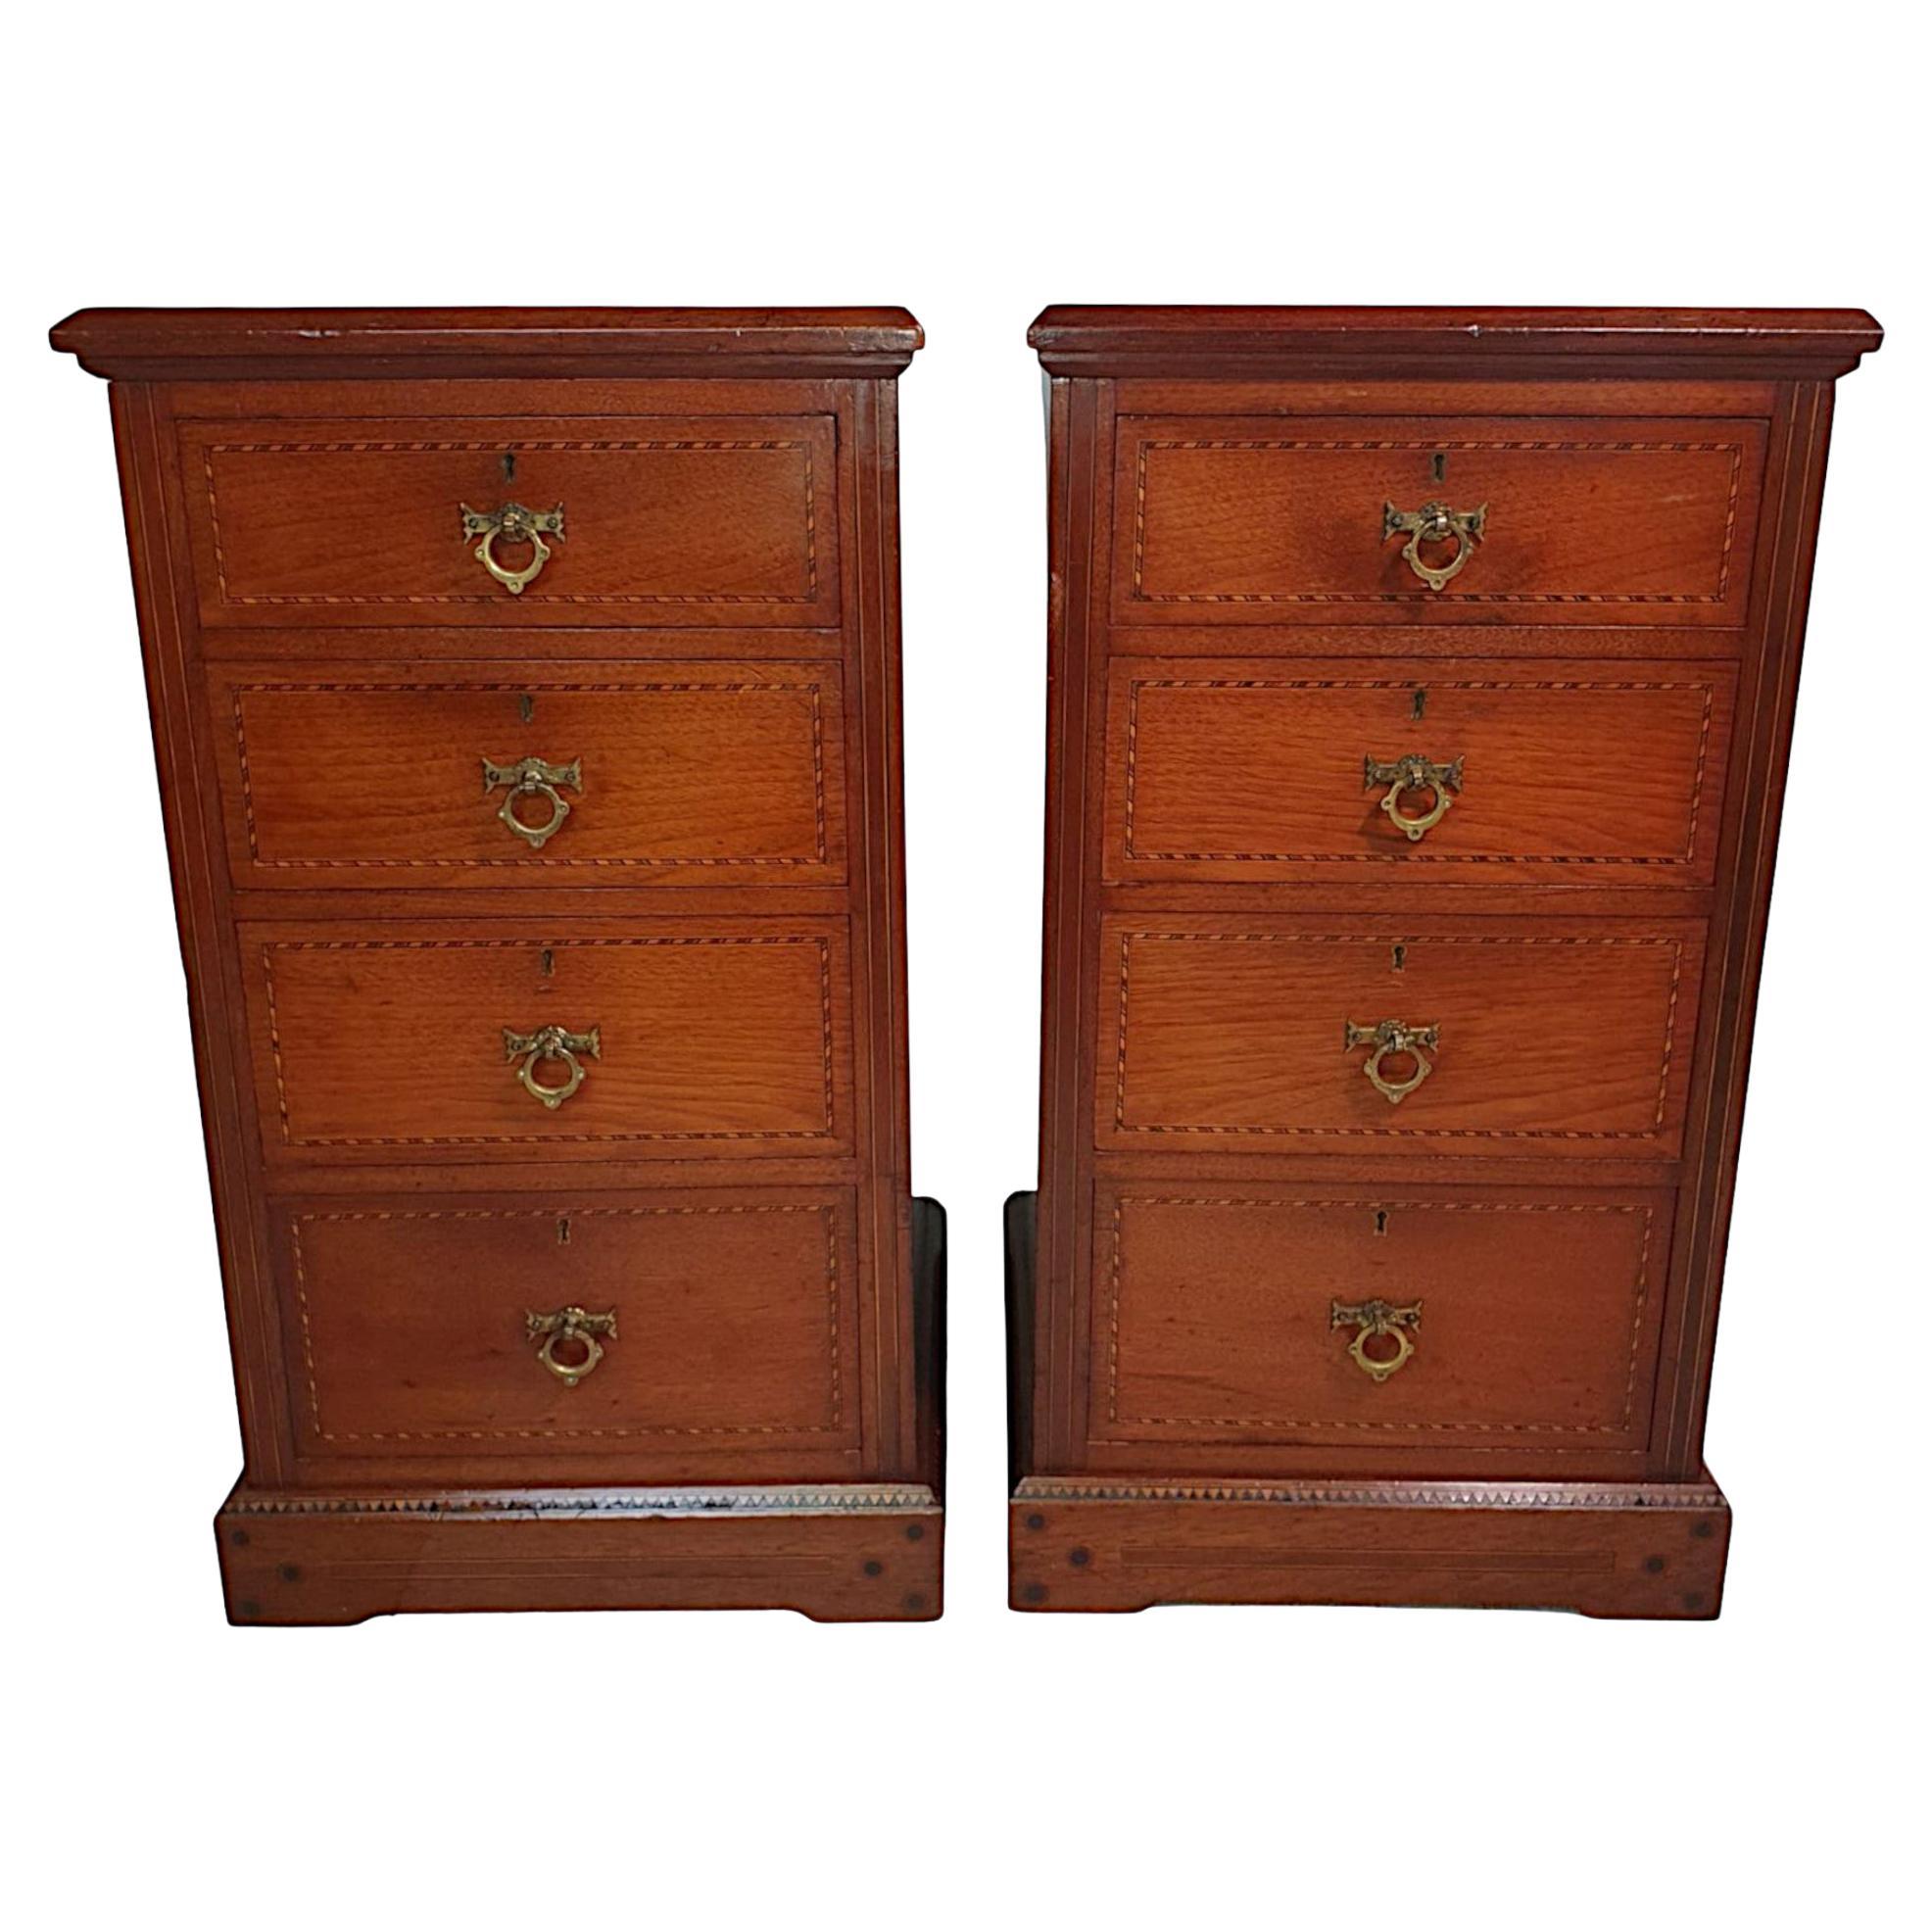 Lovely Quality Pair of 19th Century Inlaid Bedside Chests